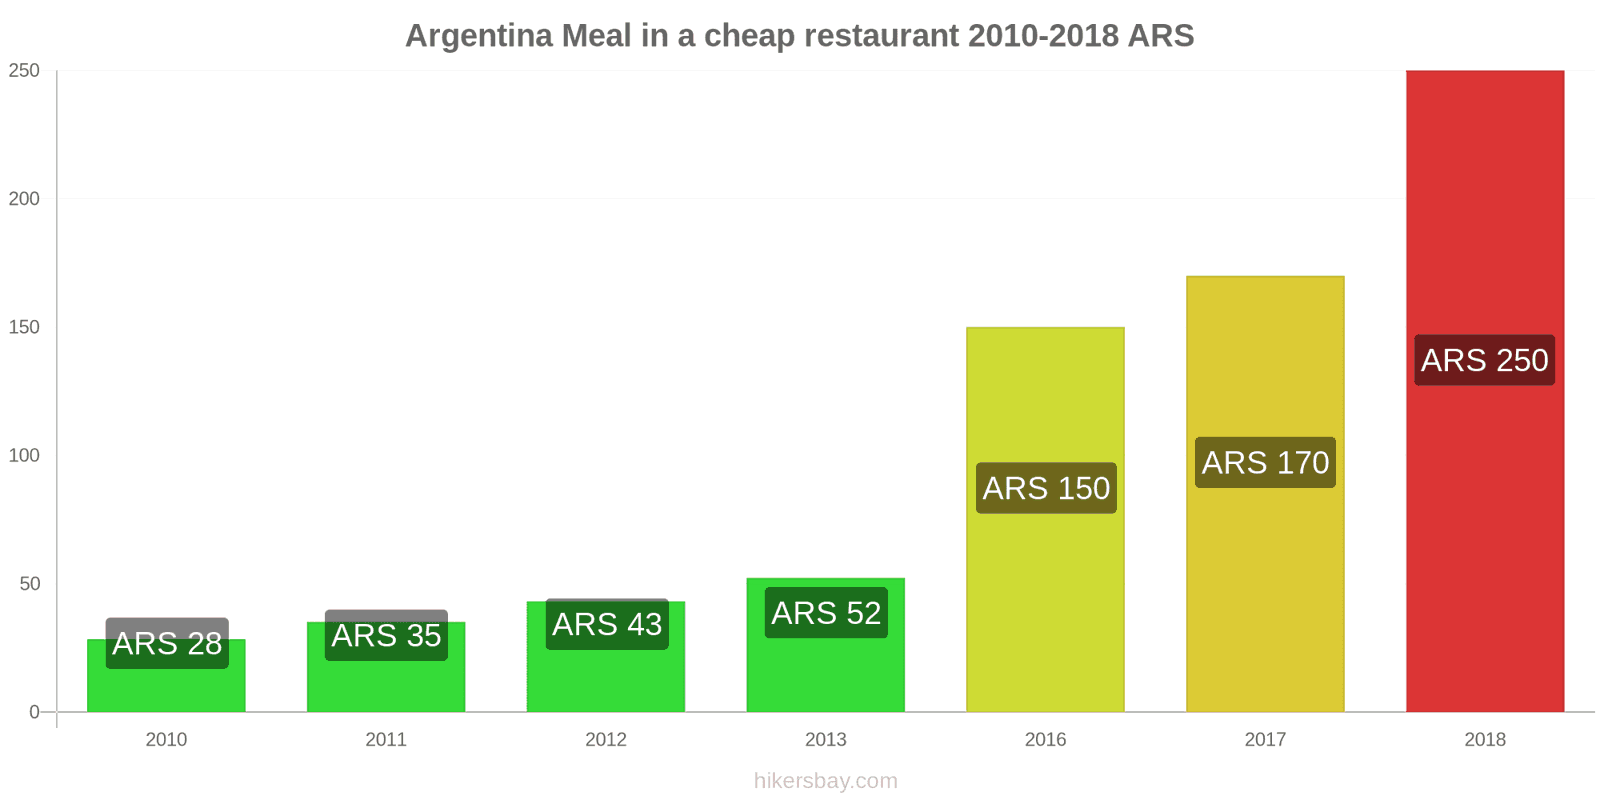 Argentina price changes Meal in a cheap restaurant hikersbay.com